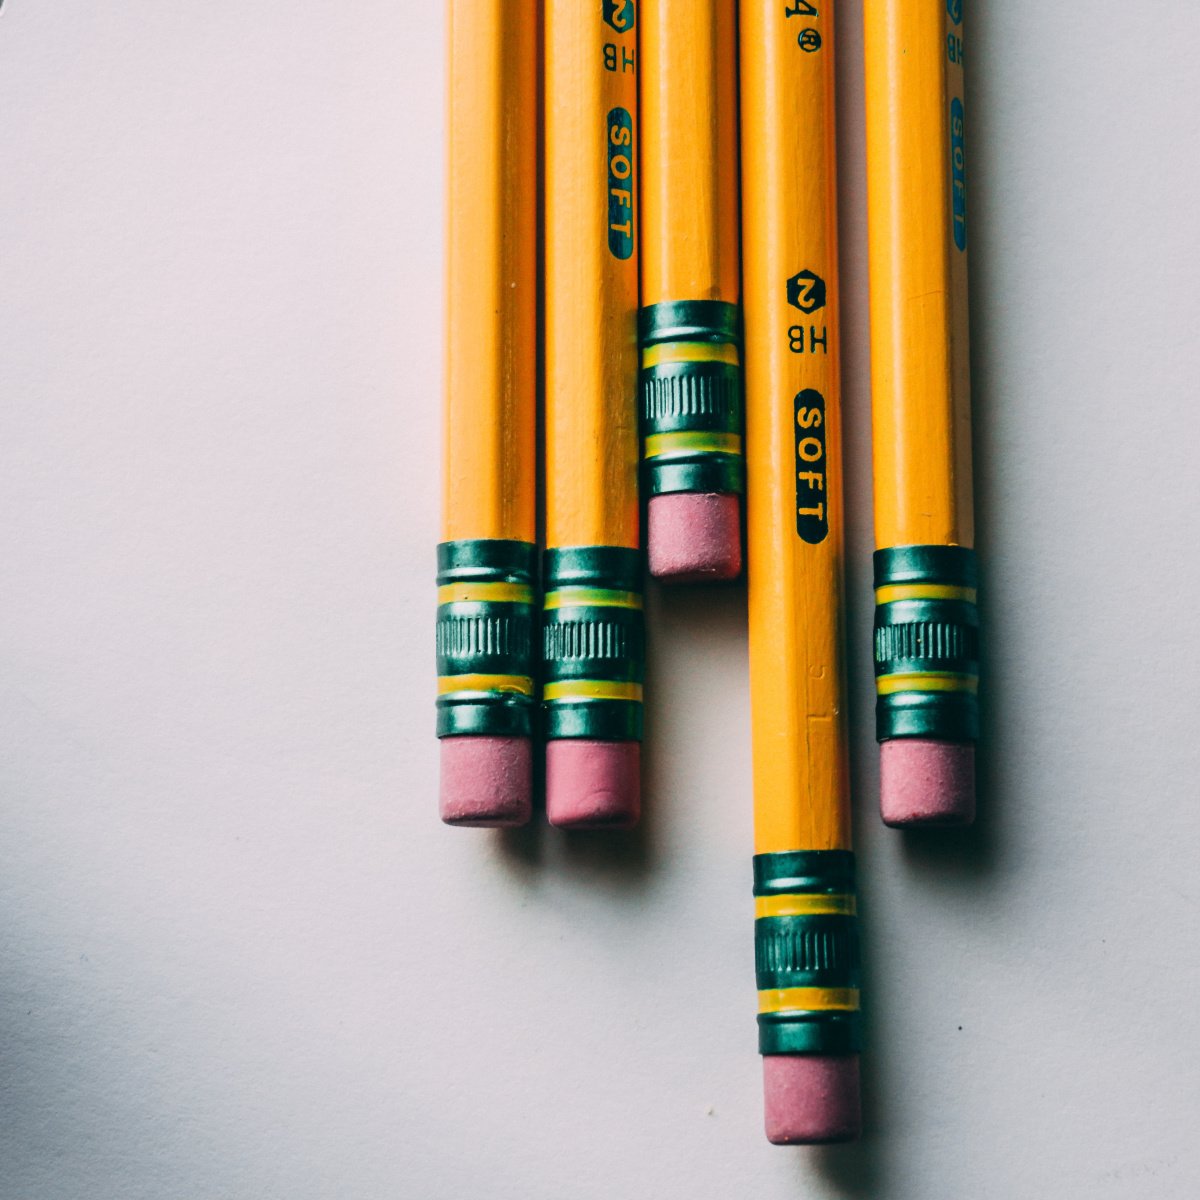 Five pencils stacked next to one another. Close up of eraser with white background.